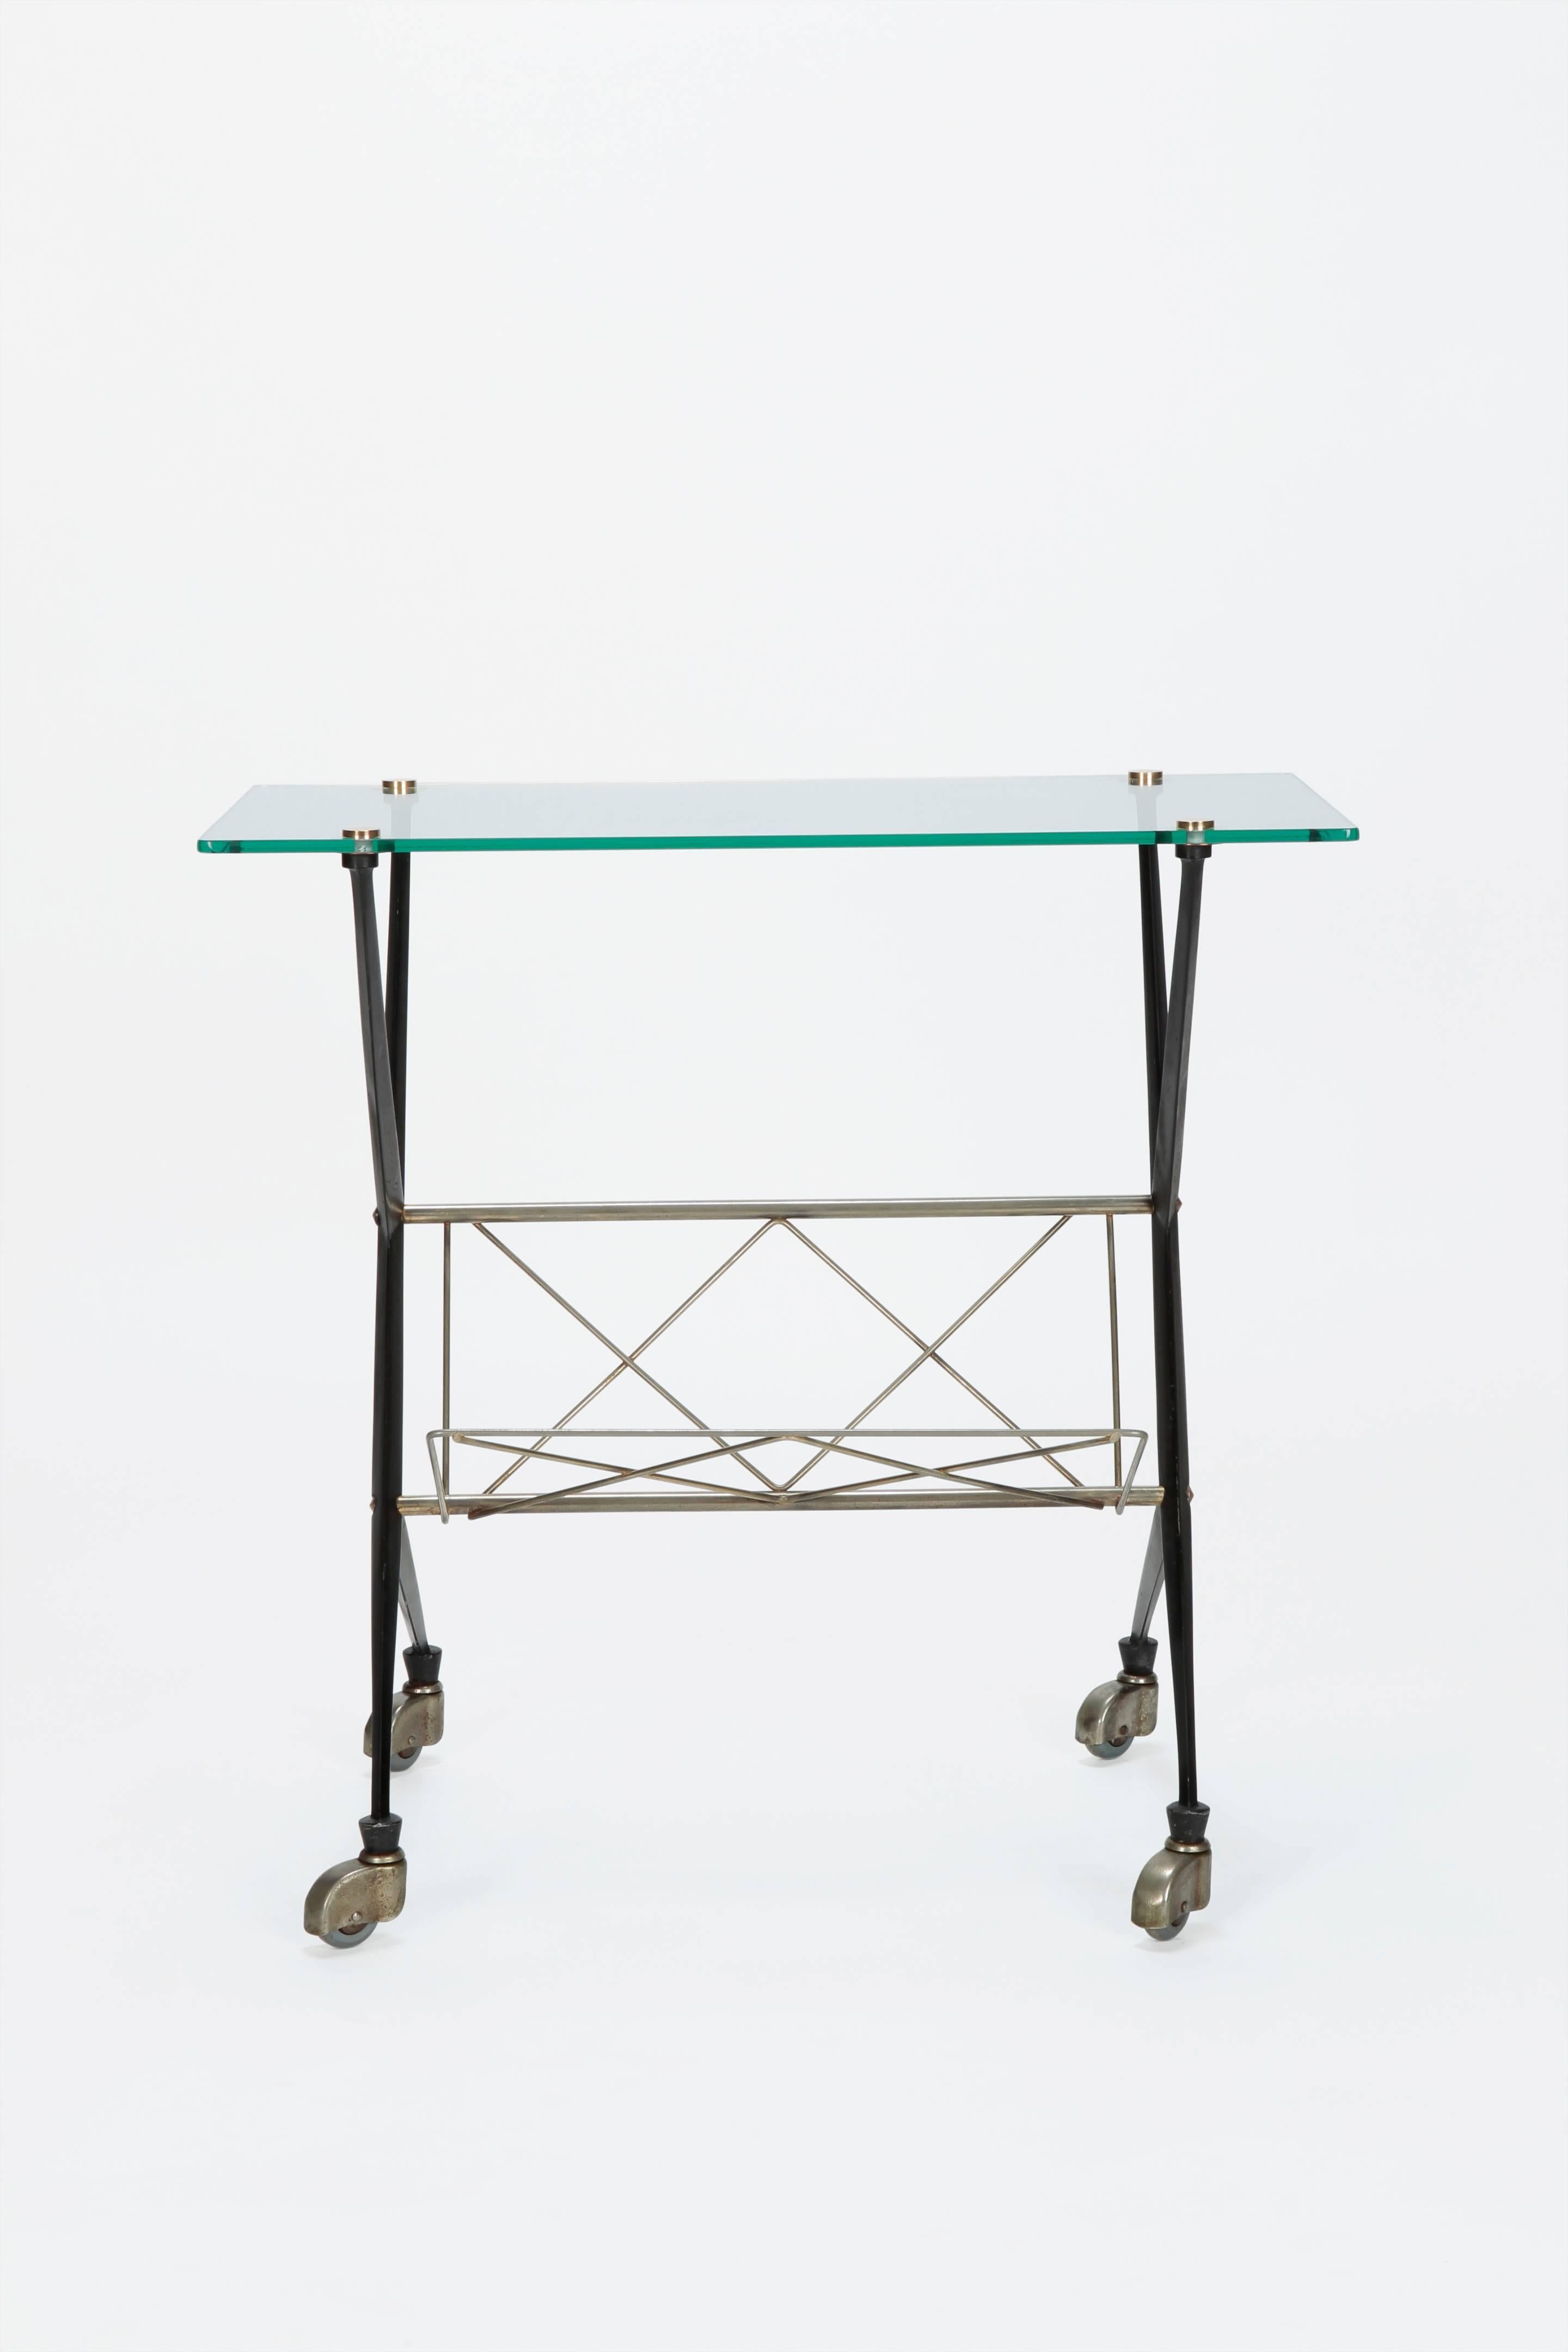 Angelo Ostuni side table manufactured in Italy by Frangi Milano in the 1950s.